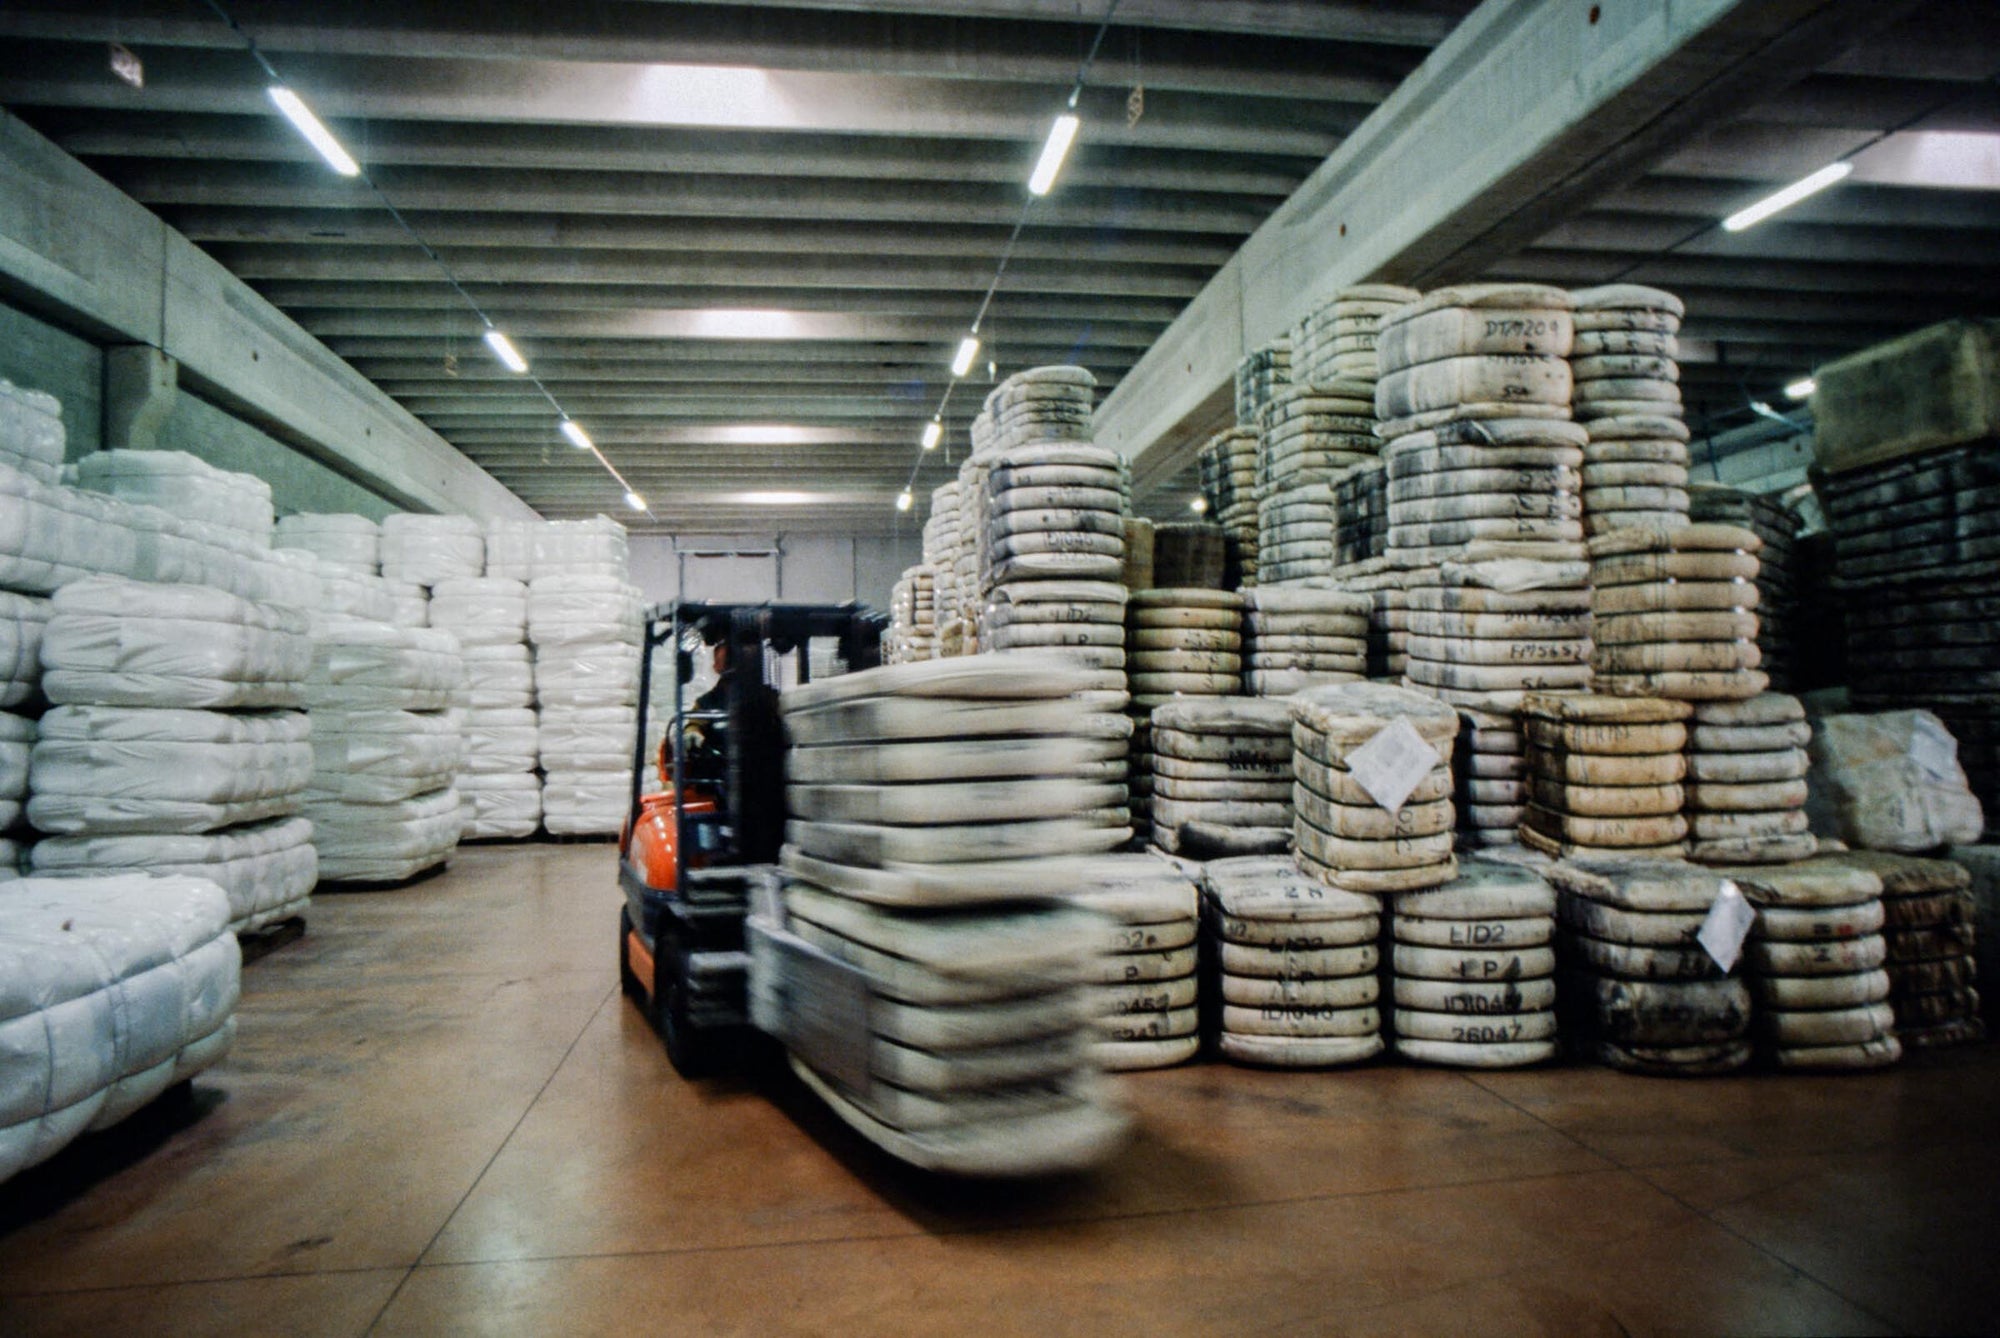 Forklift driver transporting bales of wool in the warehouse of Pettinatura di Verrone, filled with bales